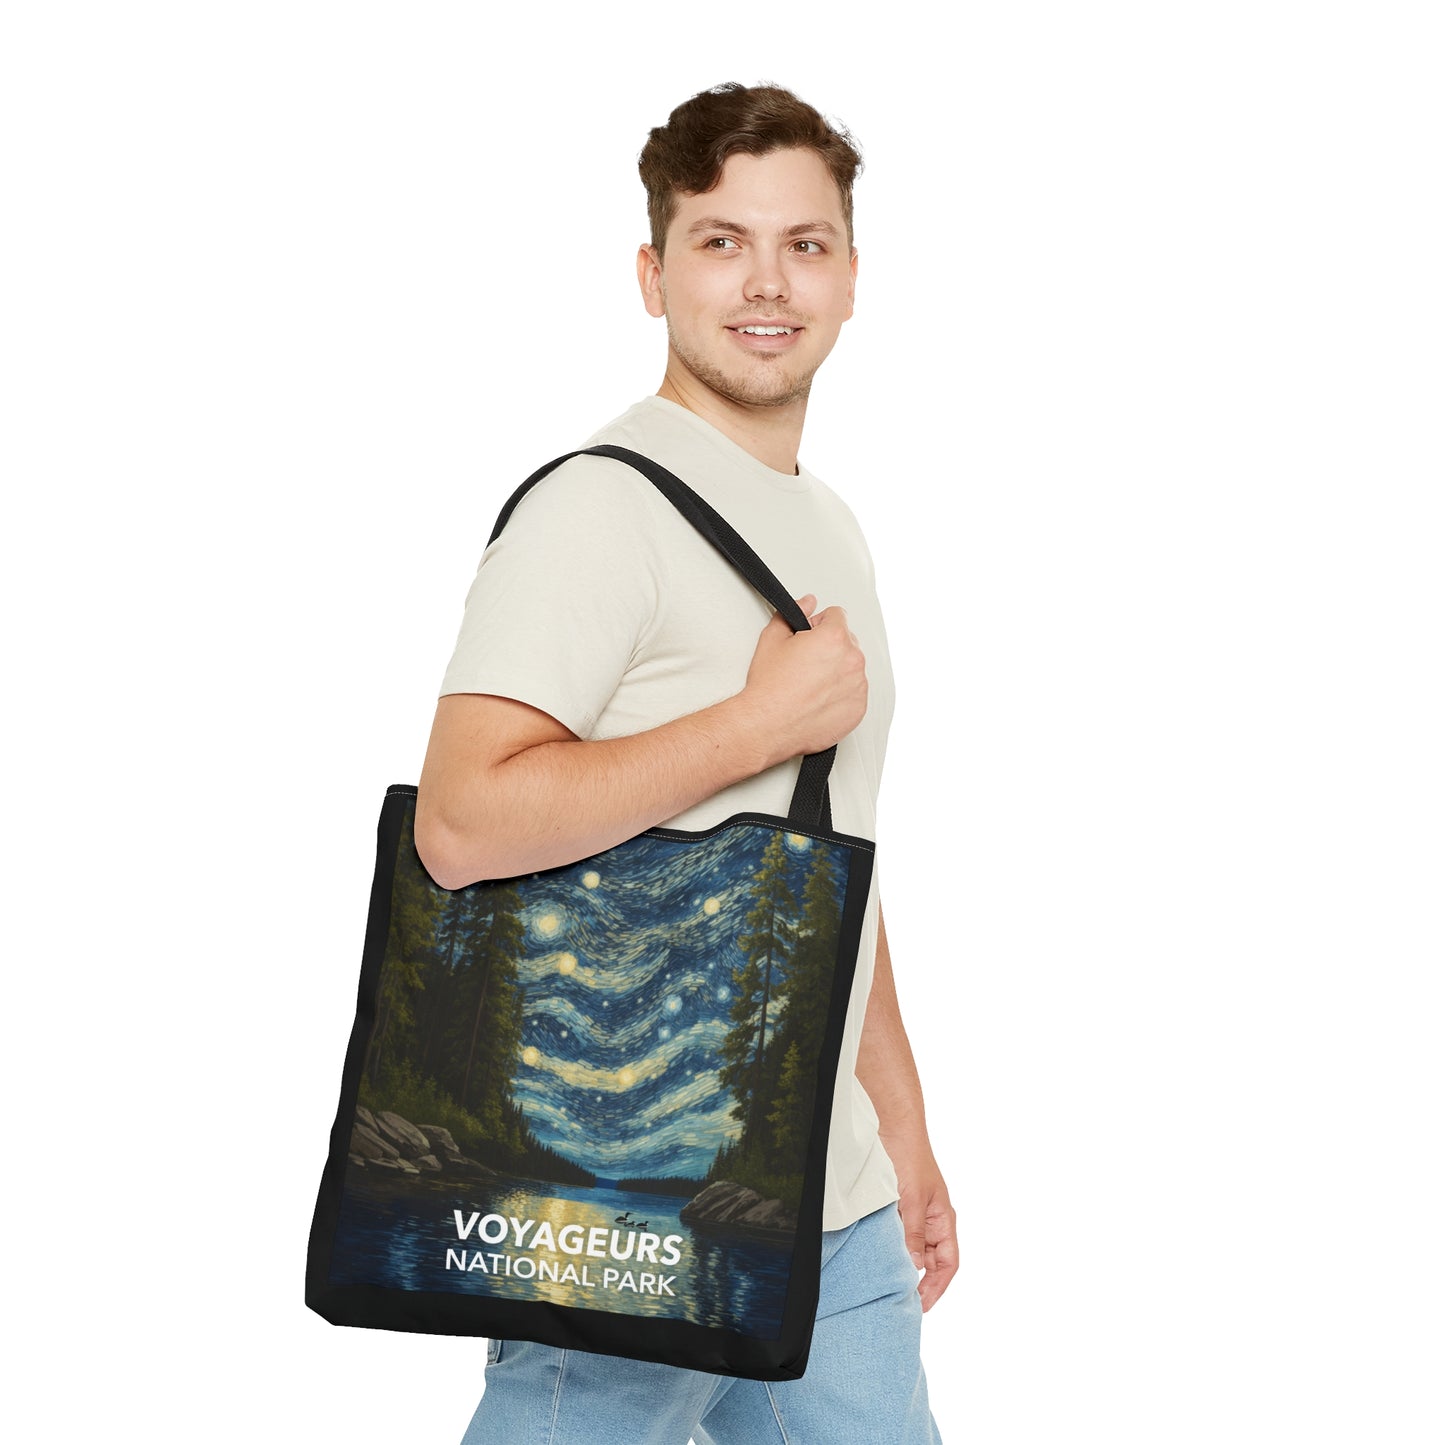 Voyageurs National Park Tote Bag - The Starry Night